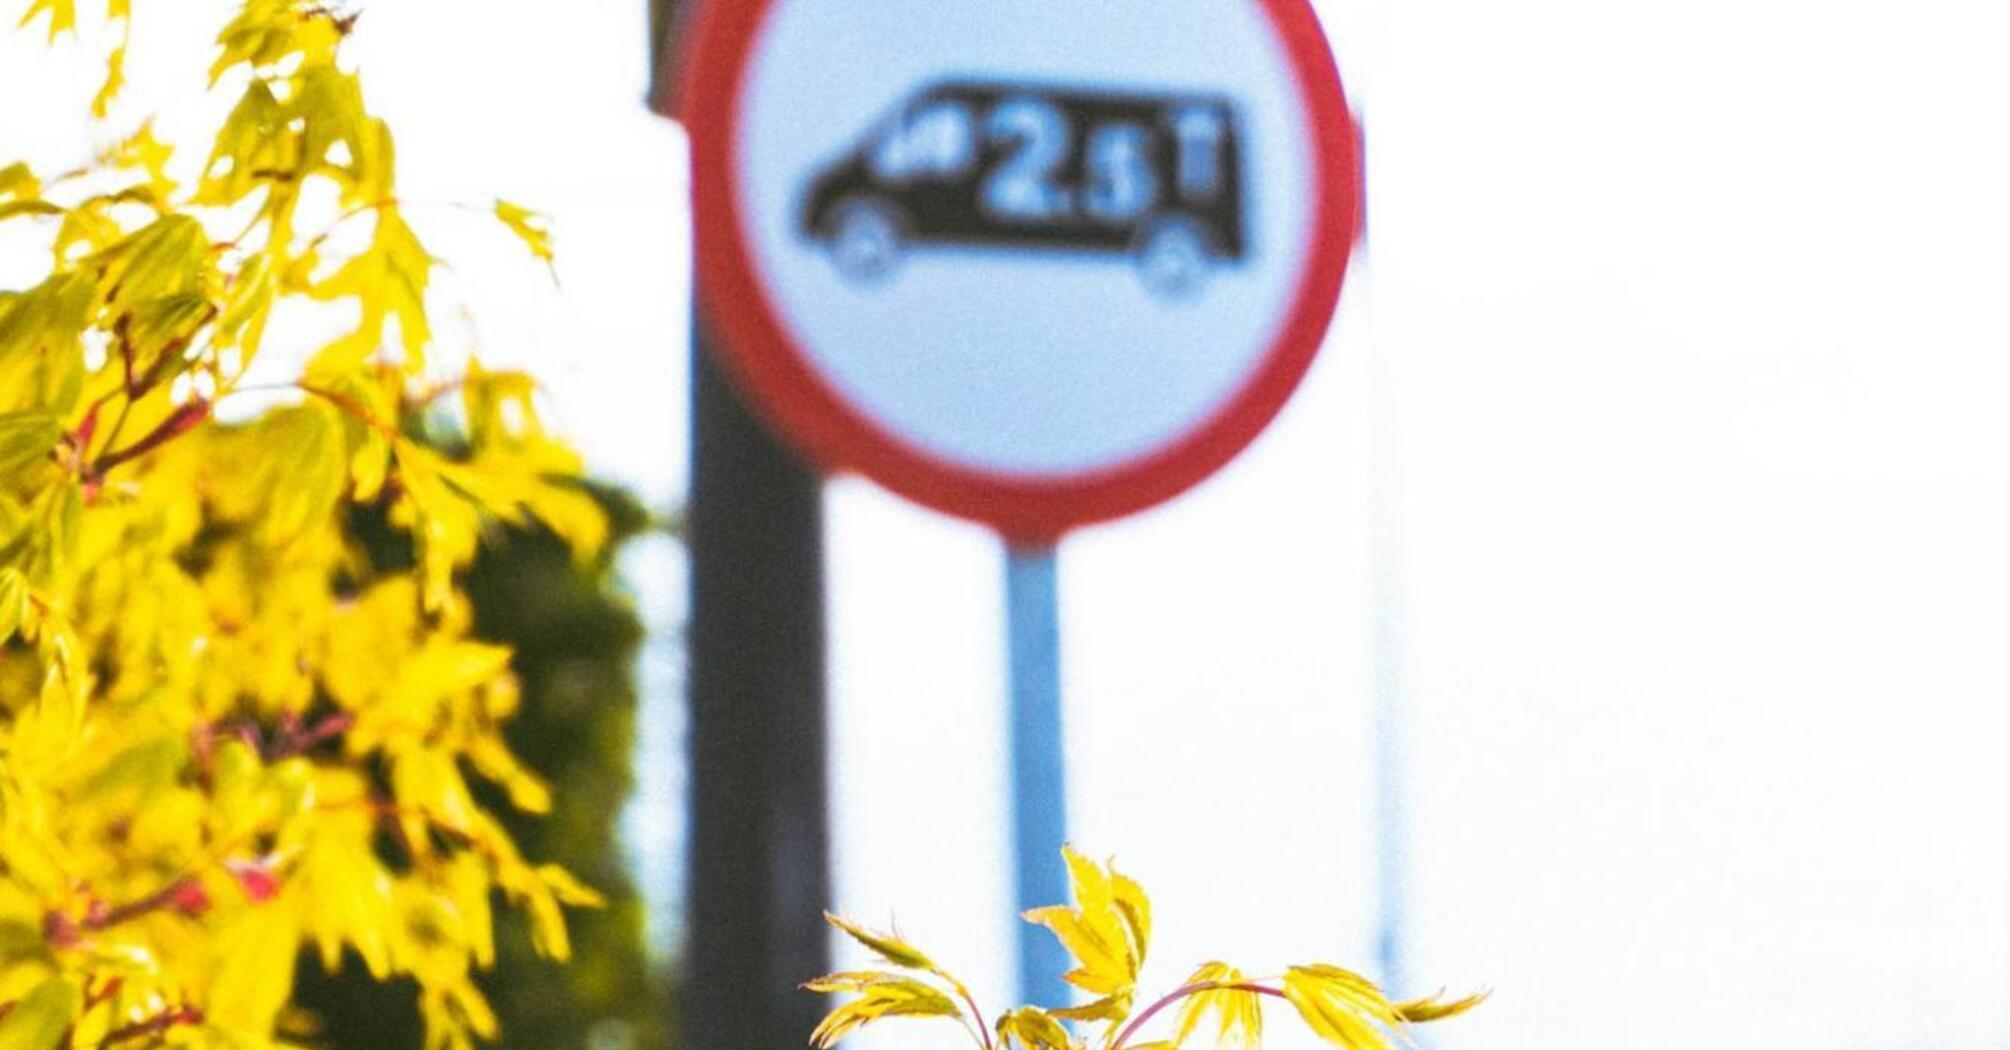 Yellow leaves with a blurred traffic sign in the background